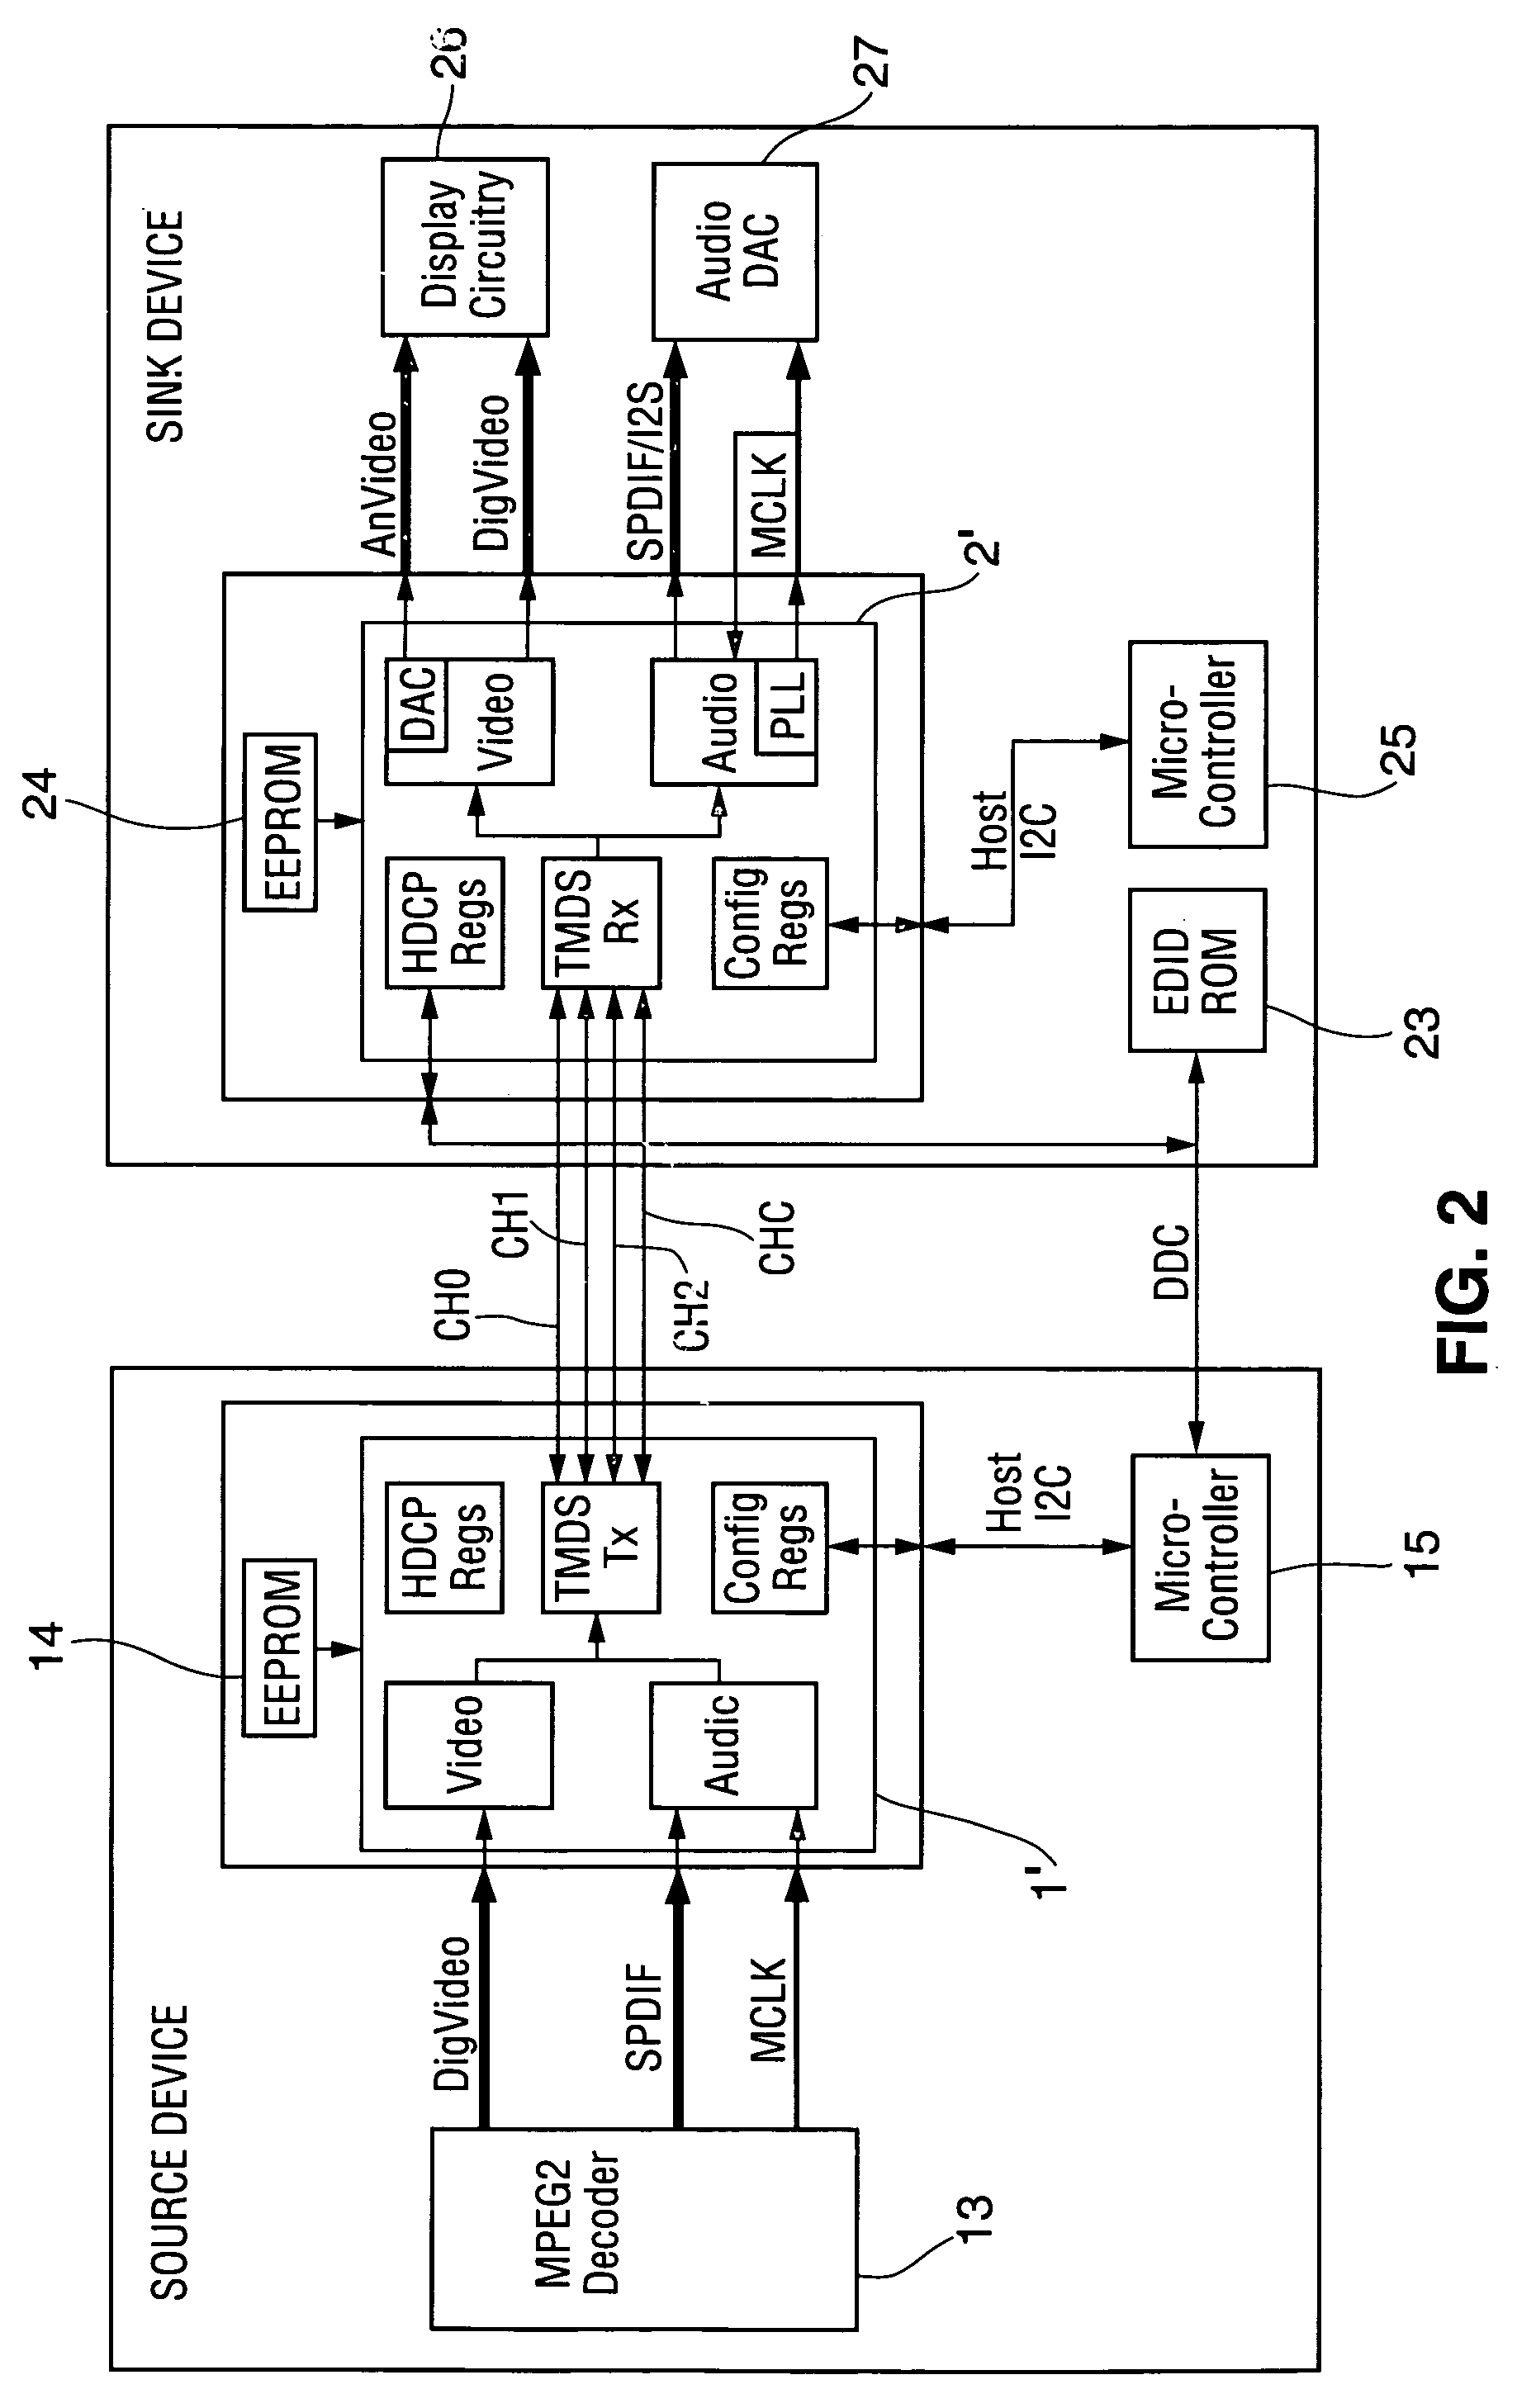 Method and apparatus for regenerating a clock for auxiliary data transmitted over a serial link with video data